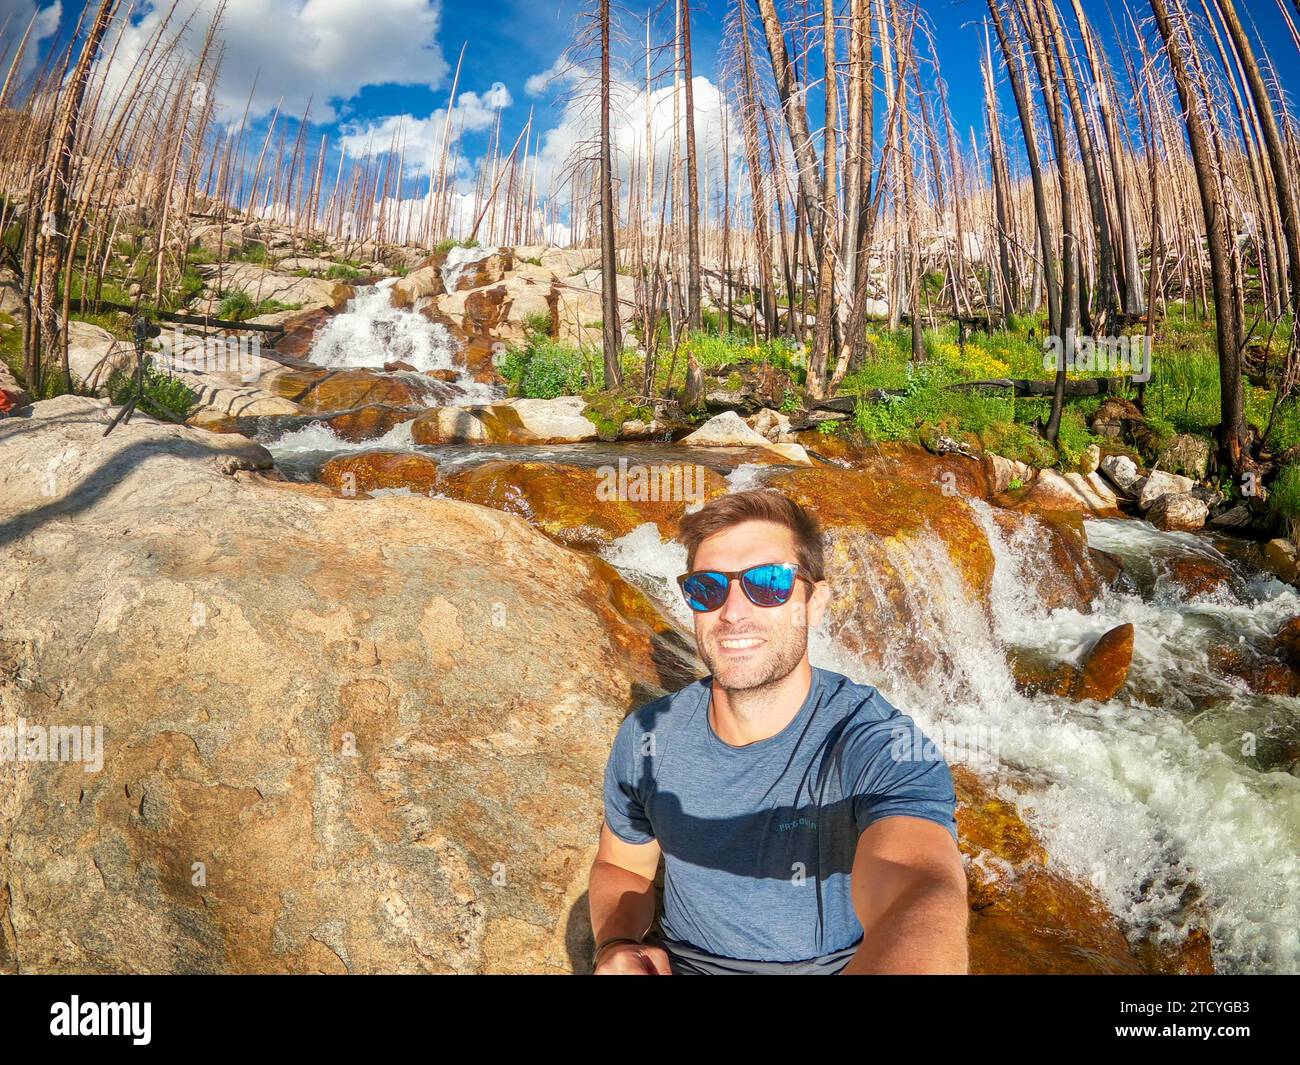 Joyful hiker takes a selfie with a striking waterfall in the regenerating forest of Rocky Mountain National Park. Stock Photo